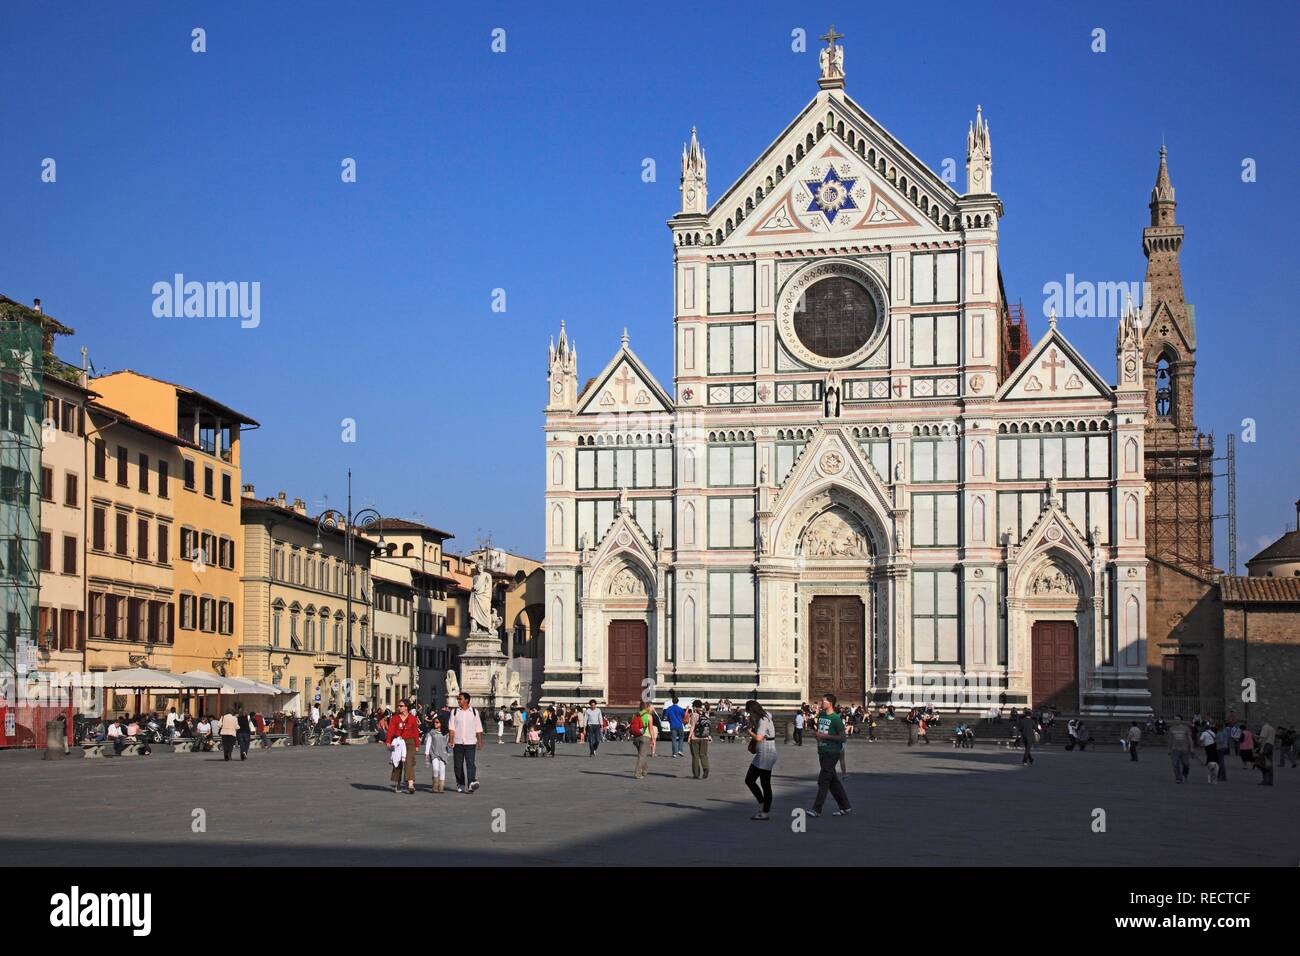 Franciscan church of Santa Croce at the Piazza Santa Croce in Florence, Florence, Tuscany, Italy, Europe Stock Photo